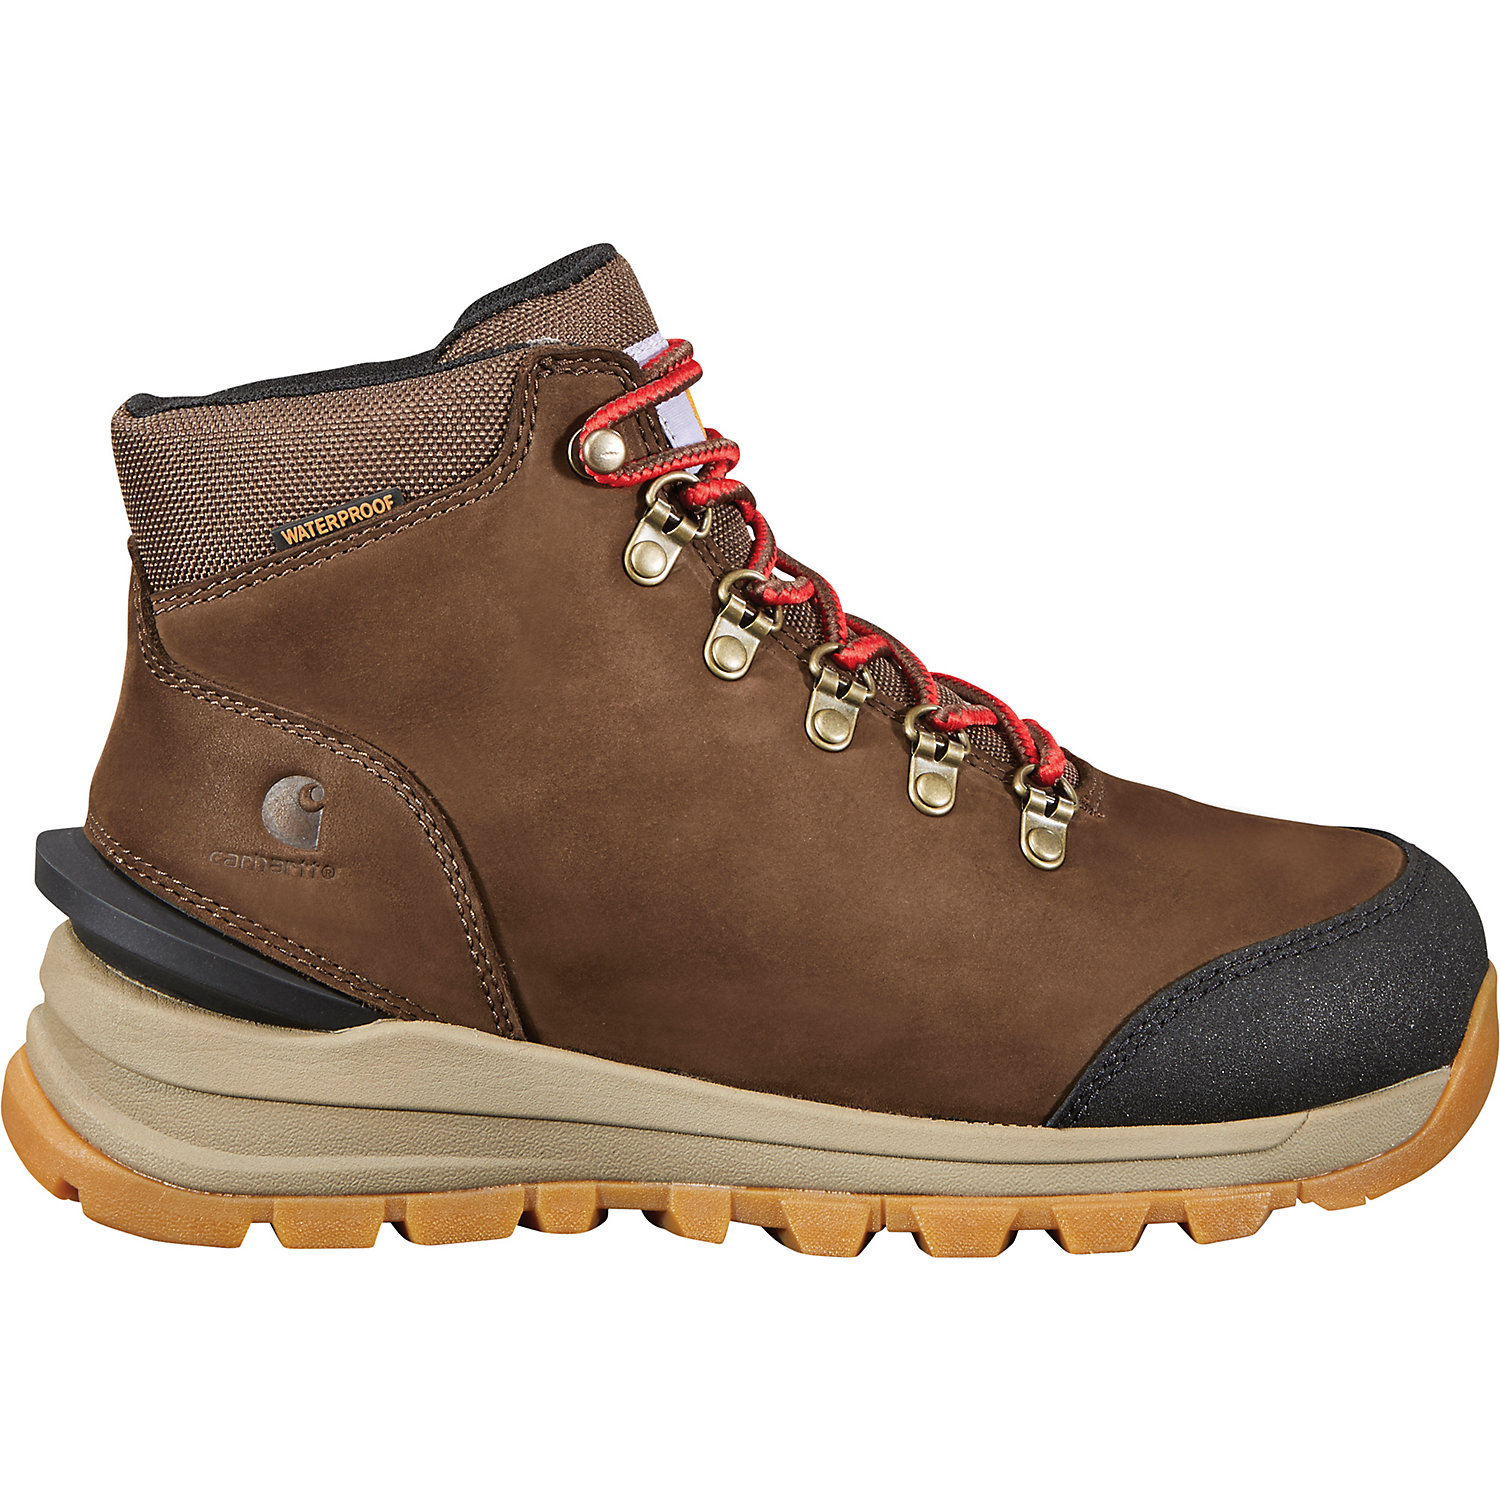 Carhartt Womens Gilmore Waterproof 5-Inch Work Hiker Boot - Non-Safety Toe